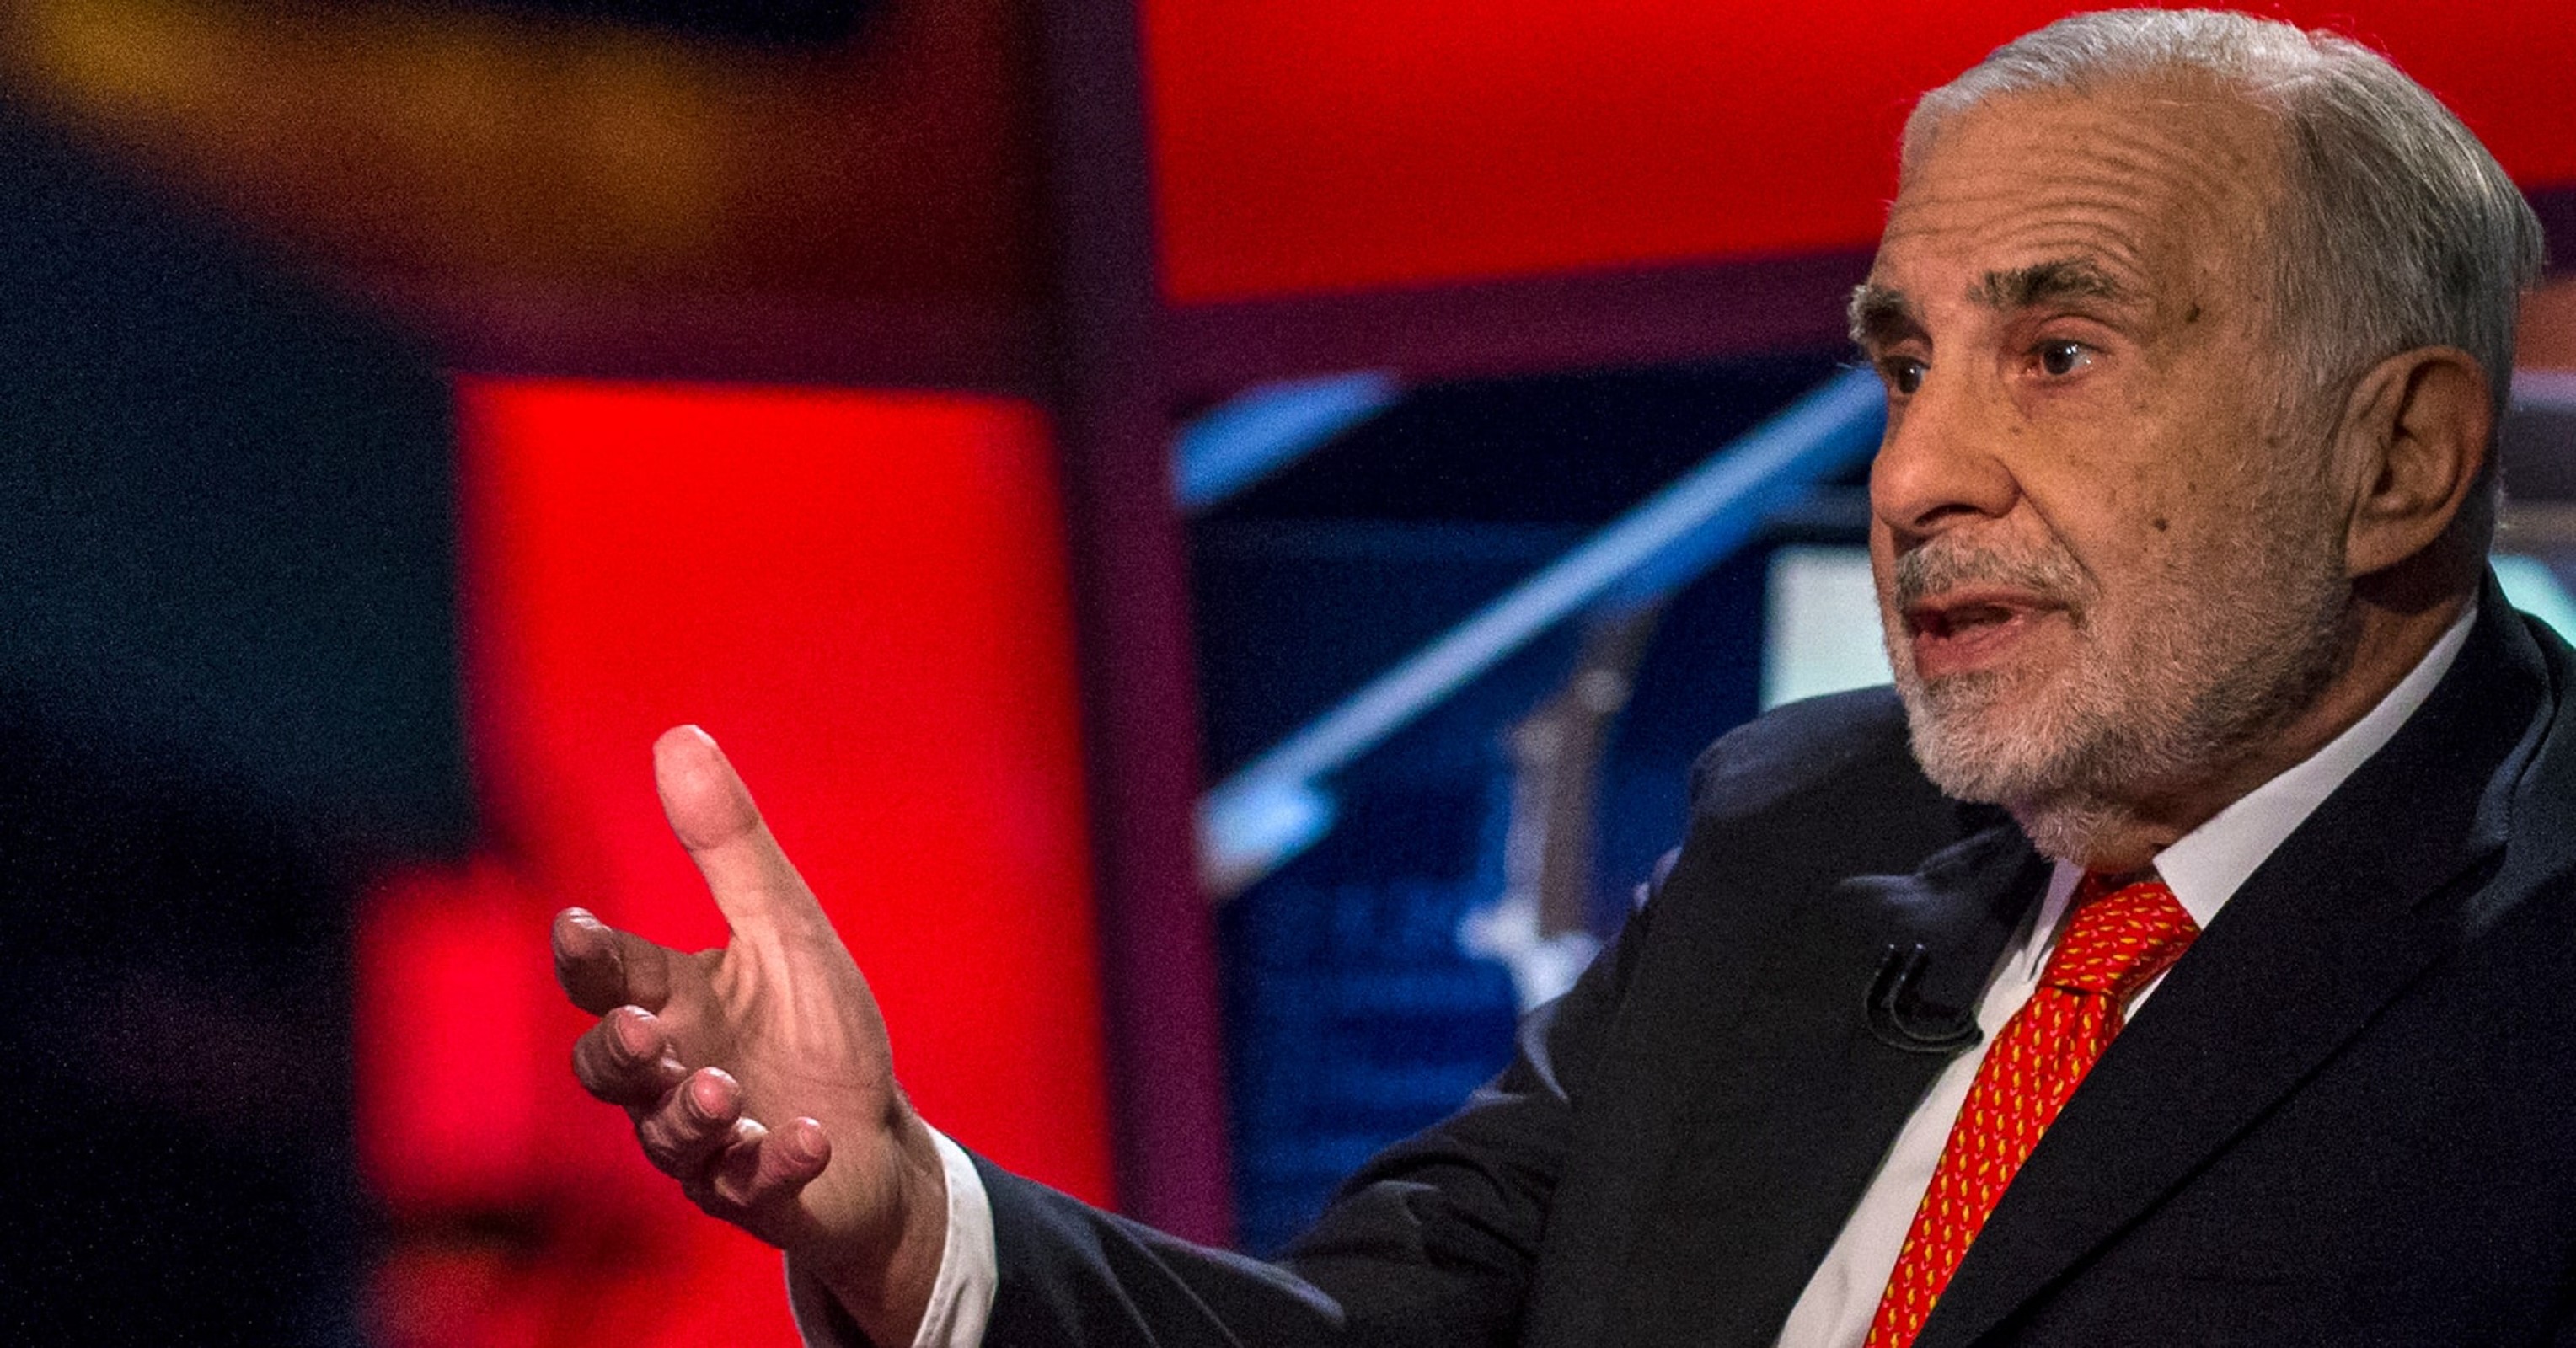 Carl Icahn has sizable stake in Caesars Entertainment, Bloomberg News reports